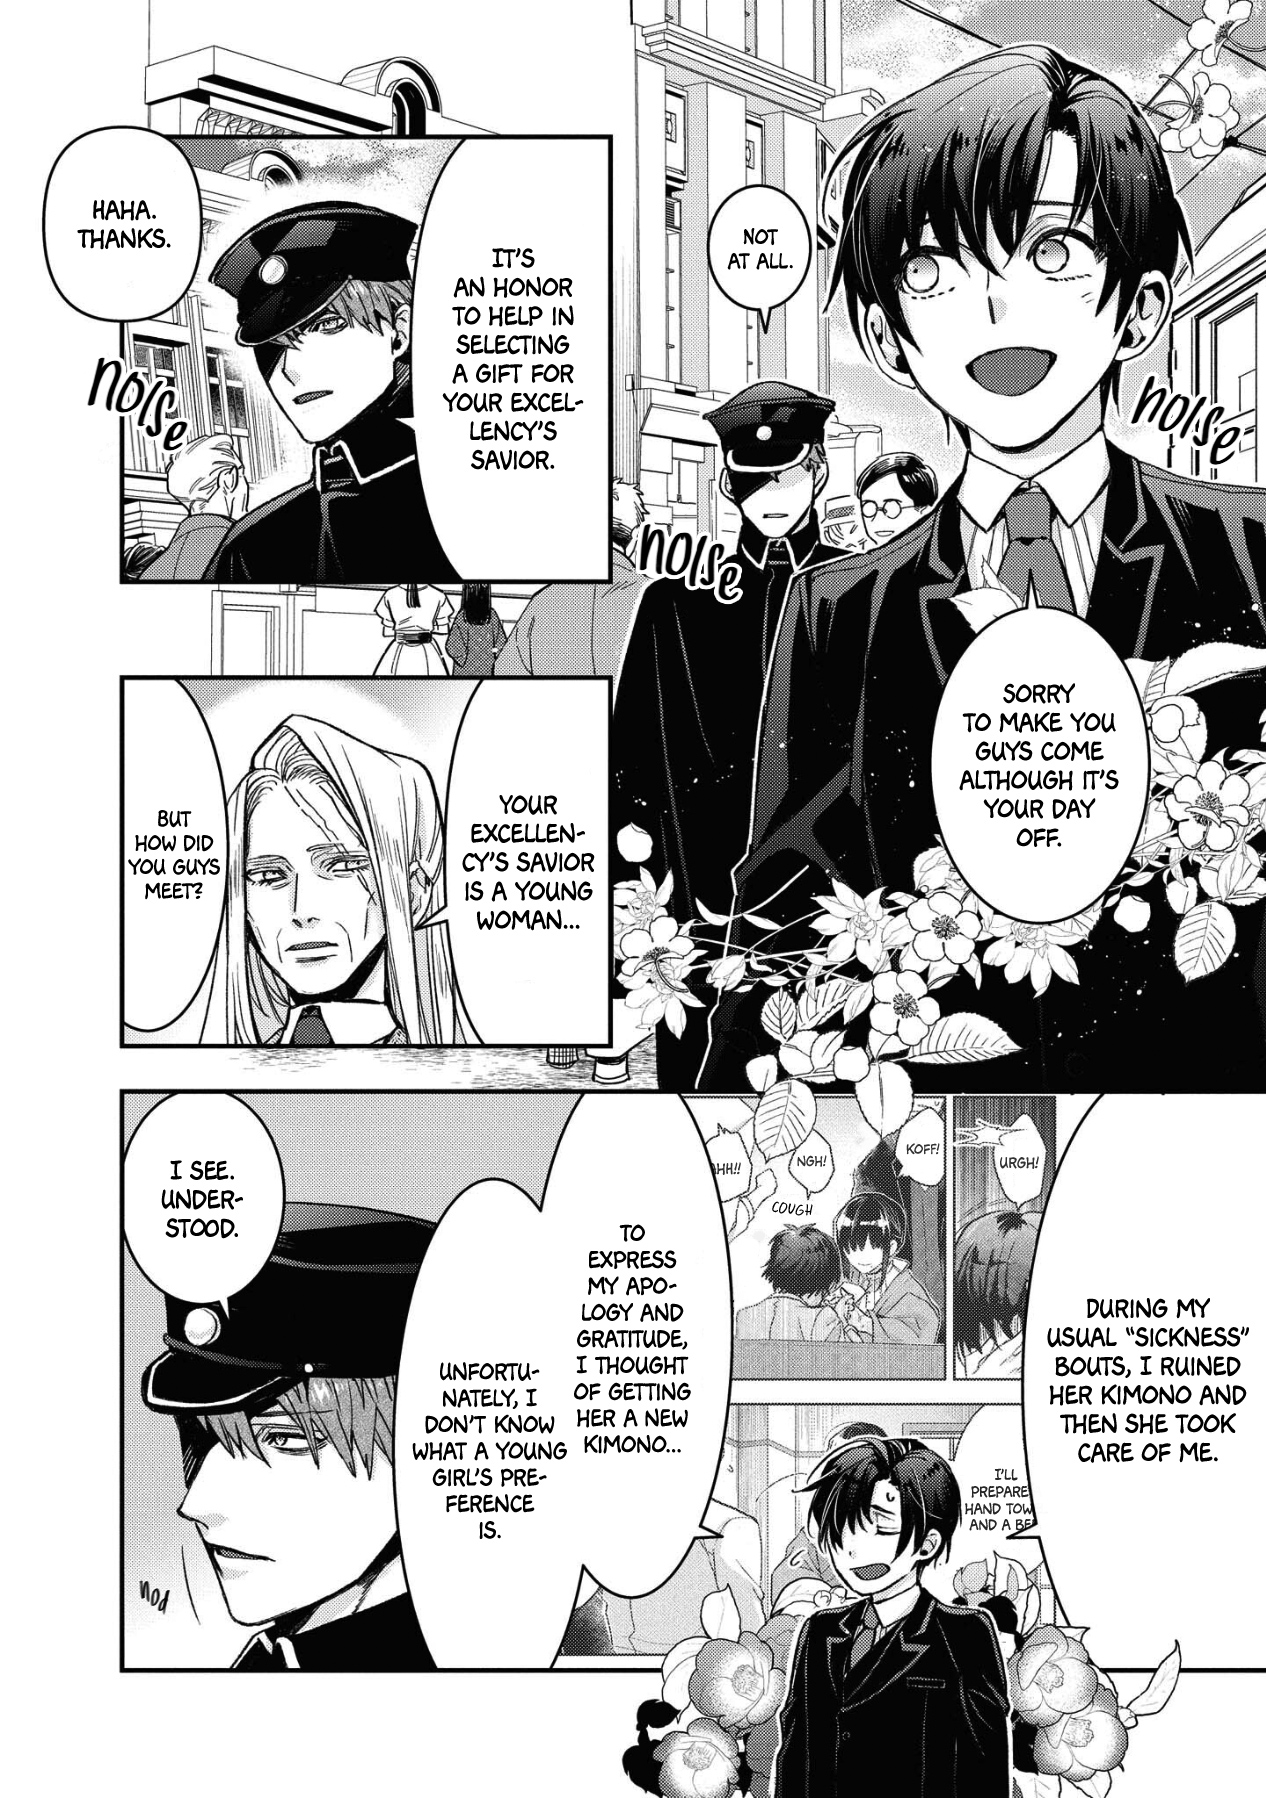 White Of A Wedding Ceremony - Page 2